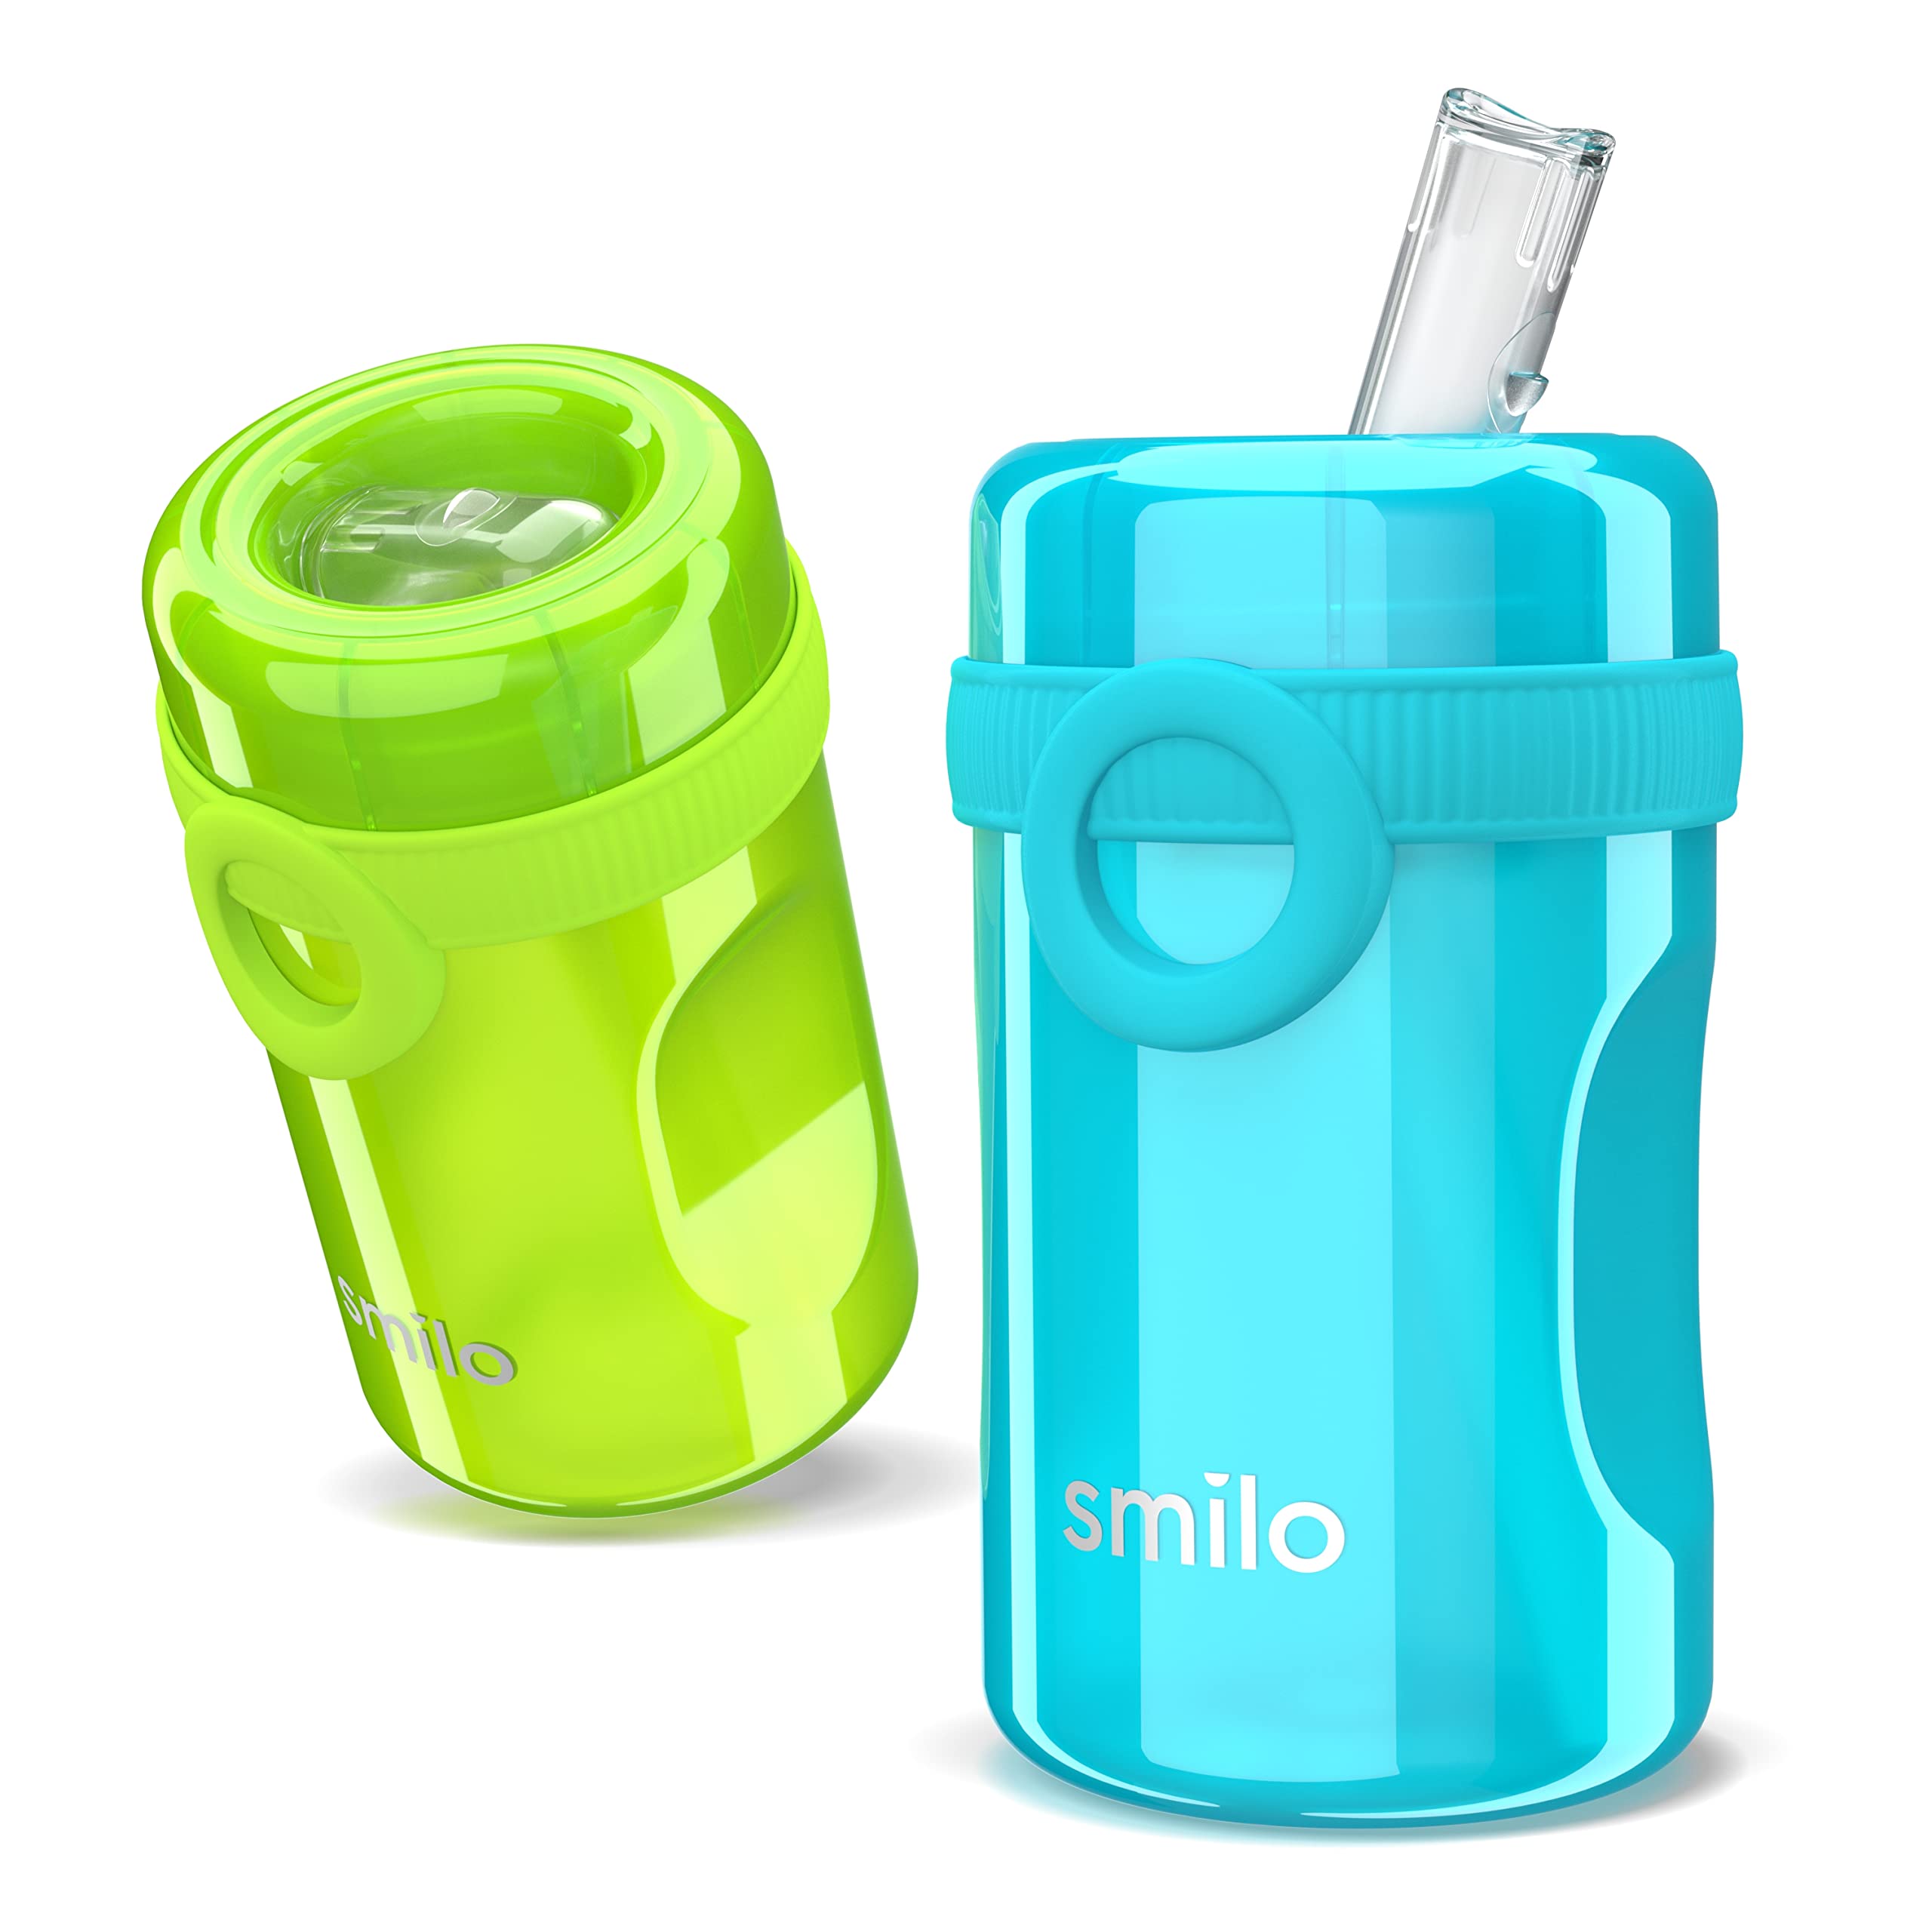 Smilo Sippy Cup 2 Pack for Toddlers (1+ years) with Spill Proof & Fold-Away  Silicone Spout - 8.5 oz Capacity - BPA-Free Toddler Cups Made in the USA -  Aqua & Green